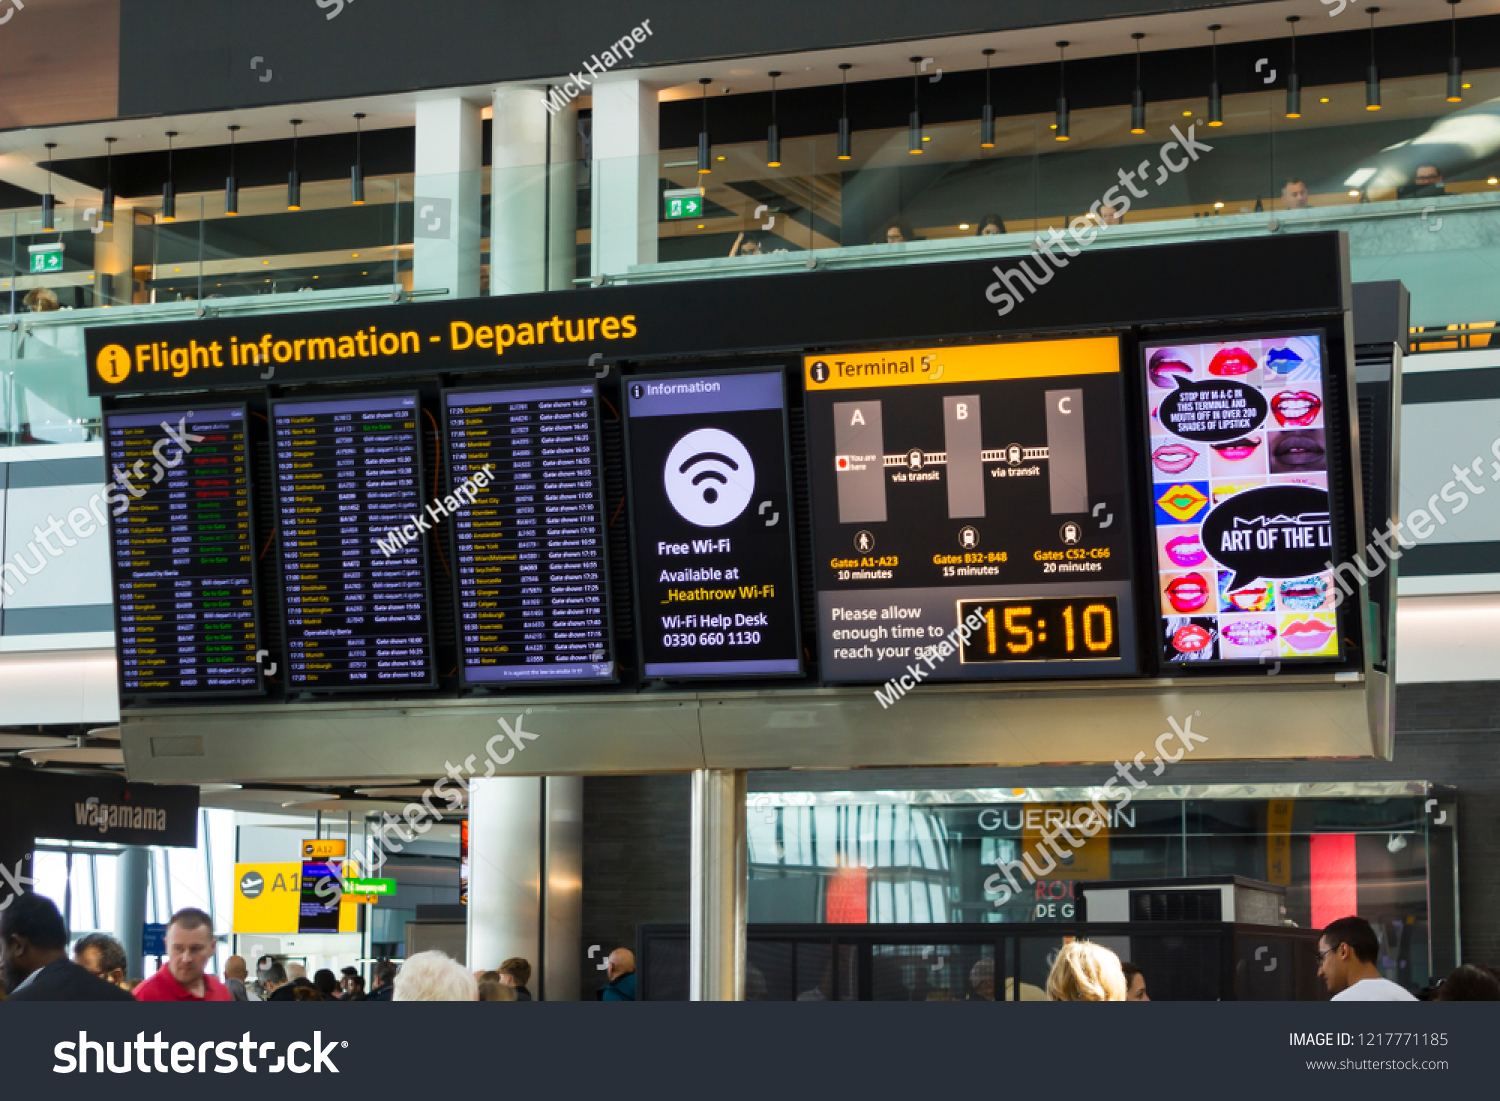 2 May 2018 Large Flight Information Stock Photo Edit Now 1217771185